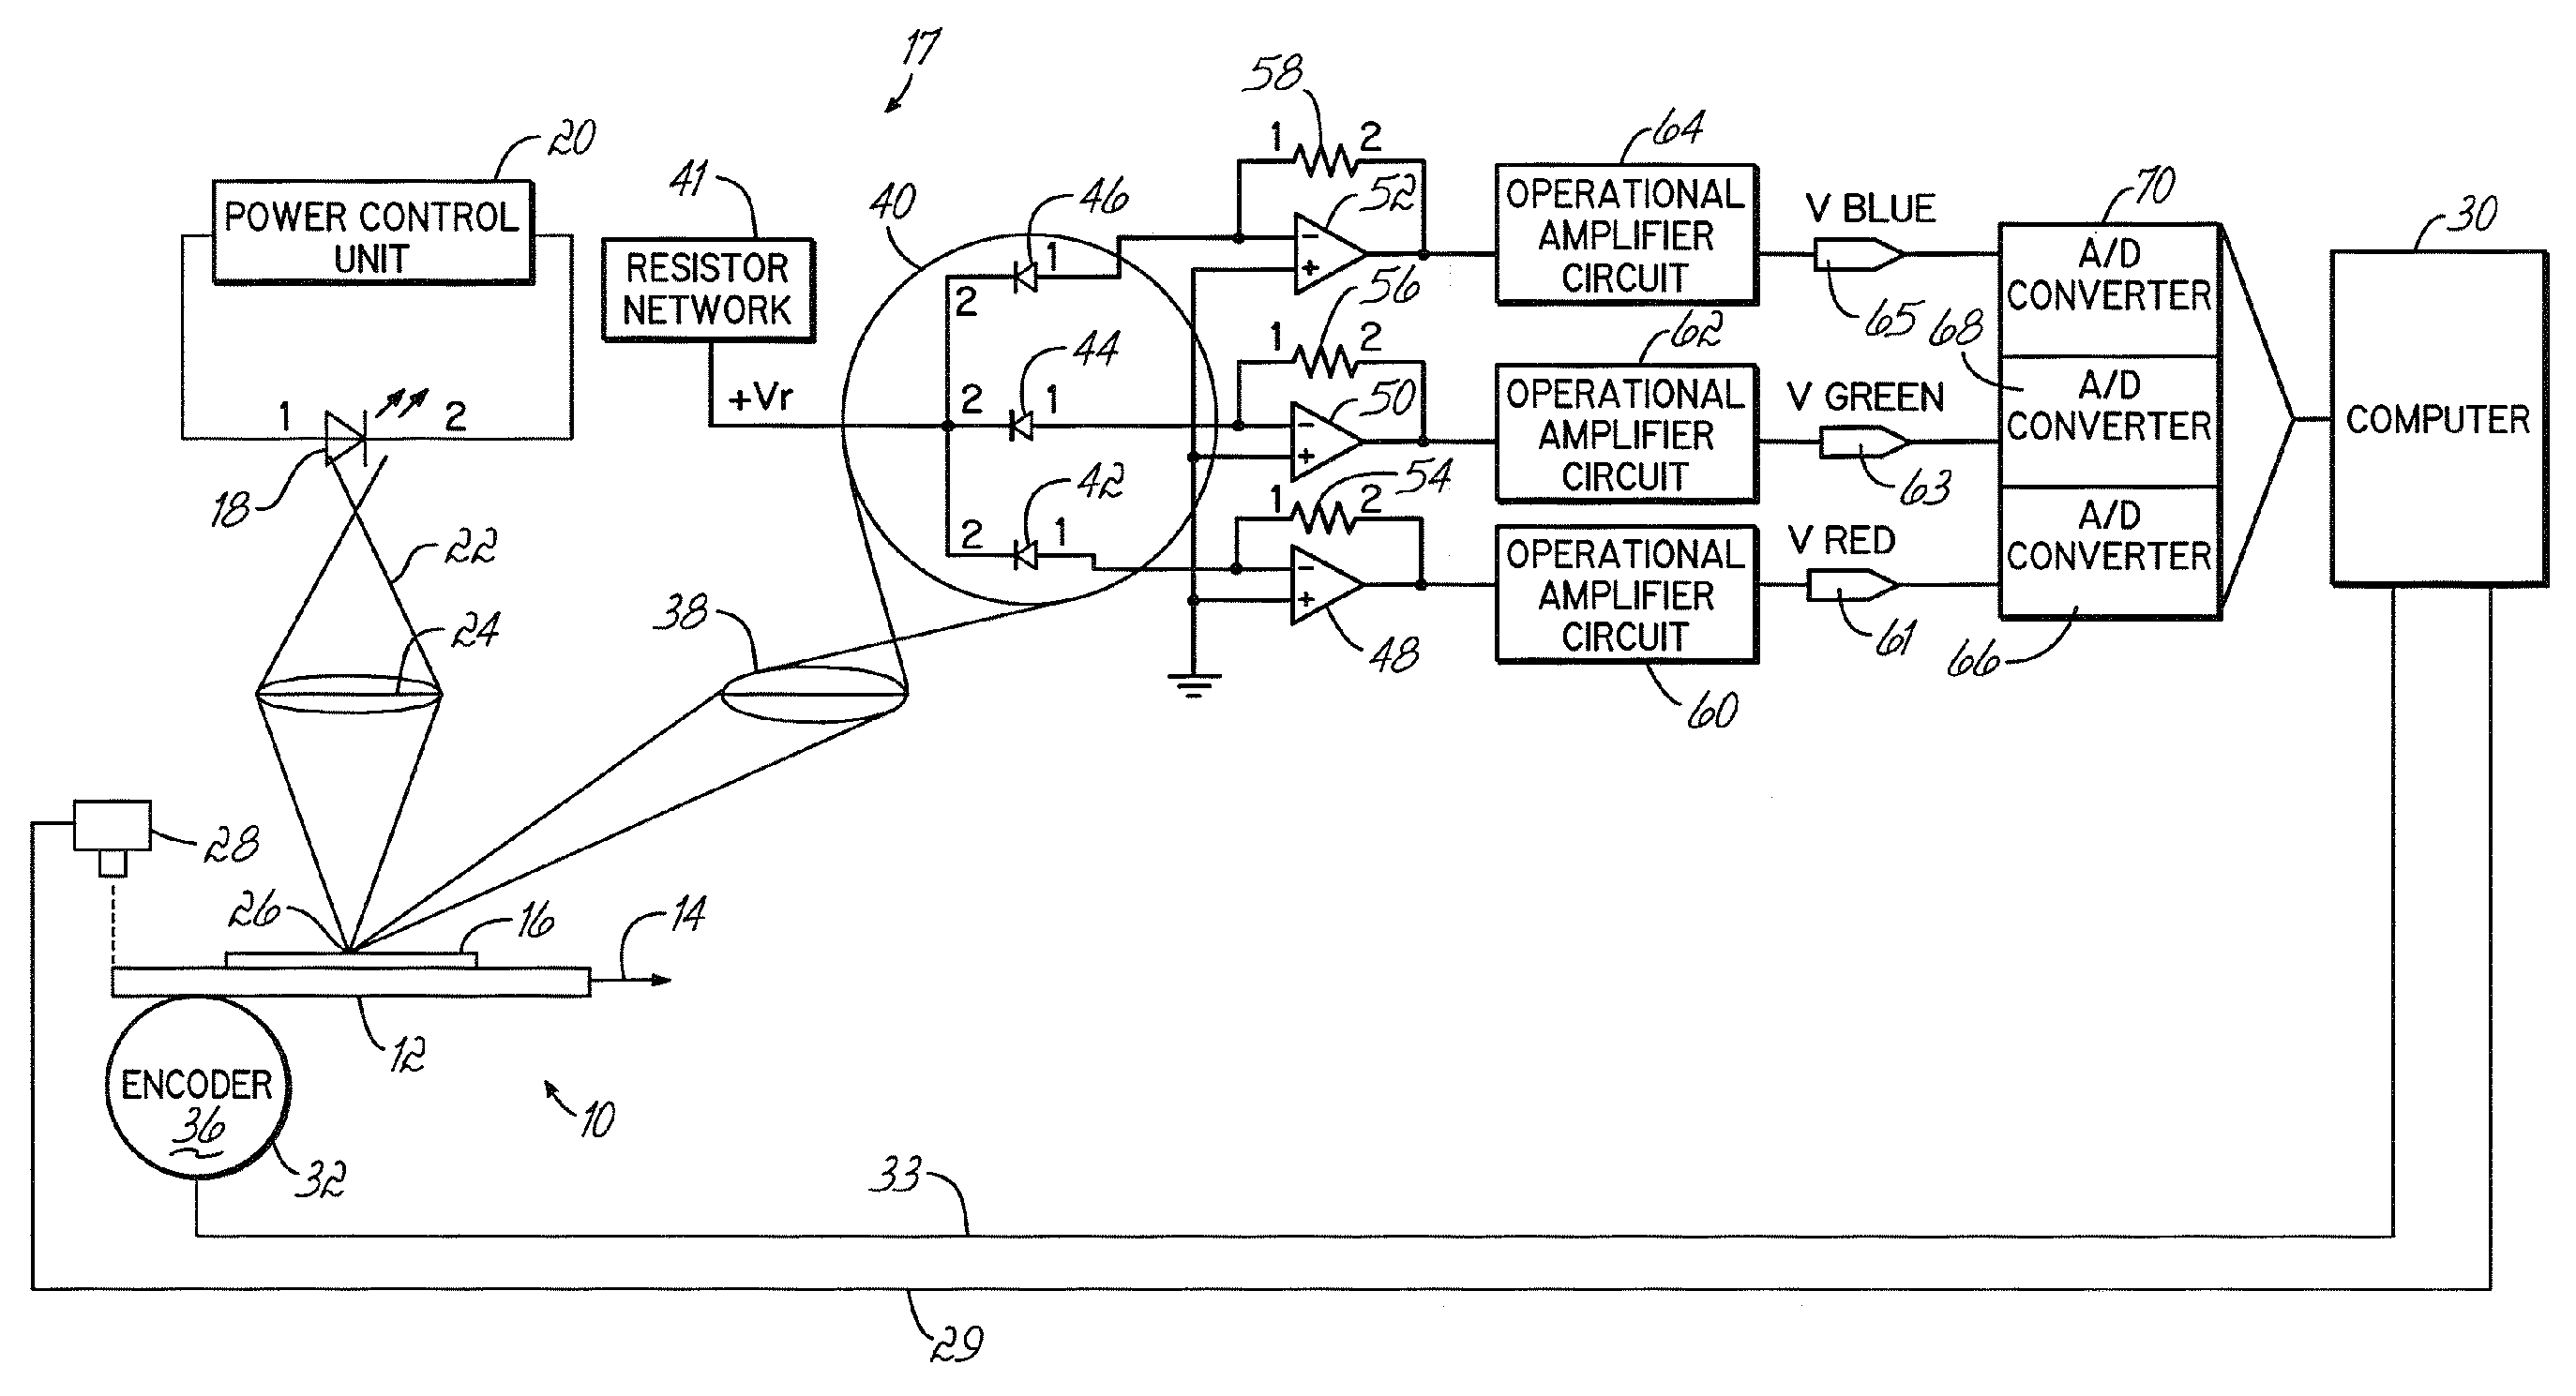 Apparatus and methods for high speed RGB color discrimination